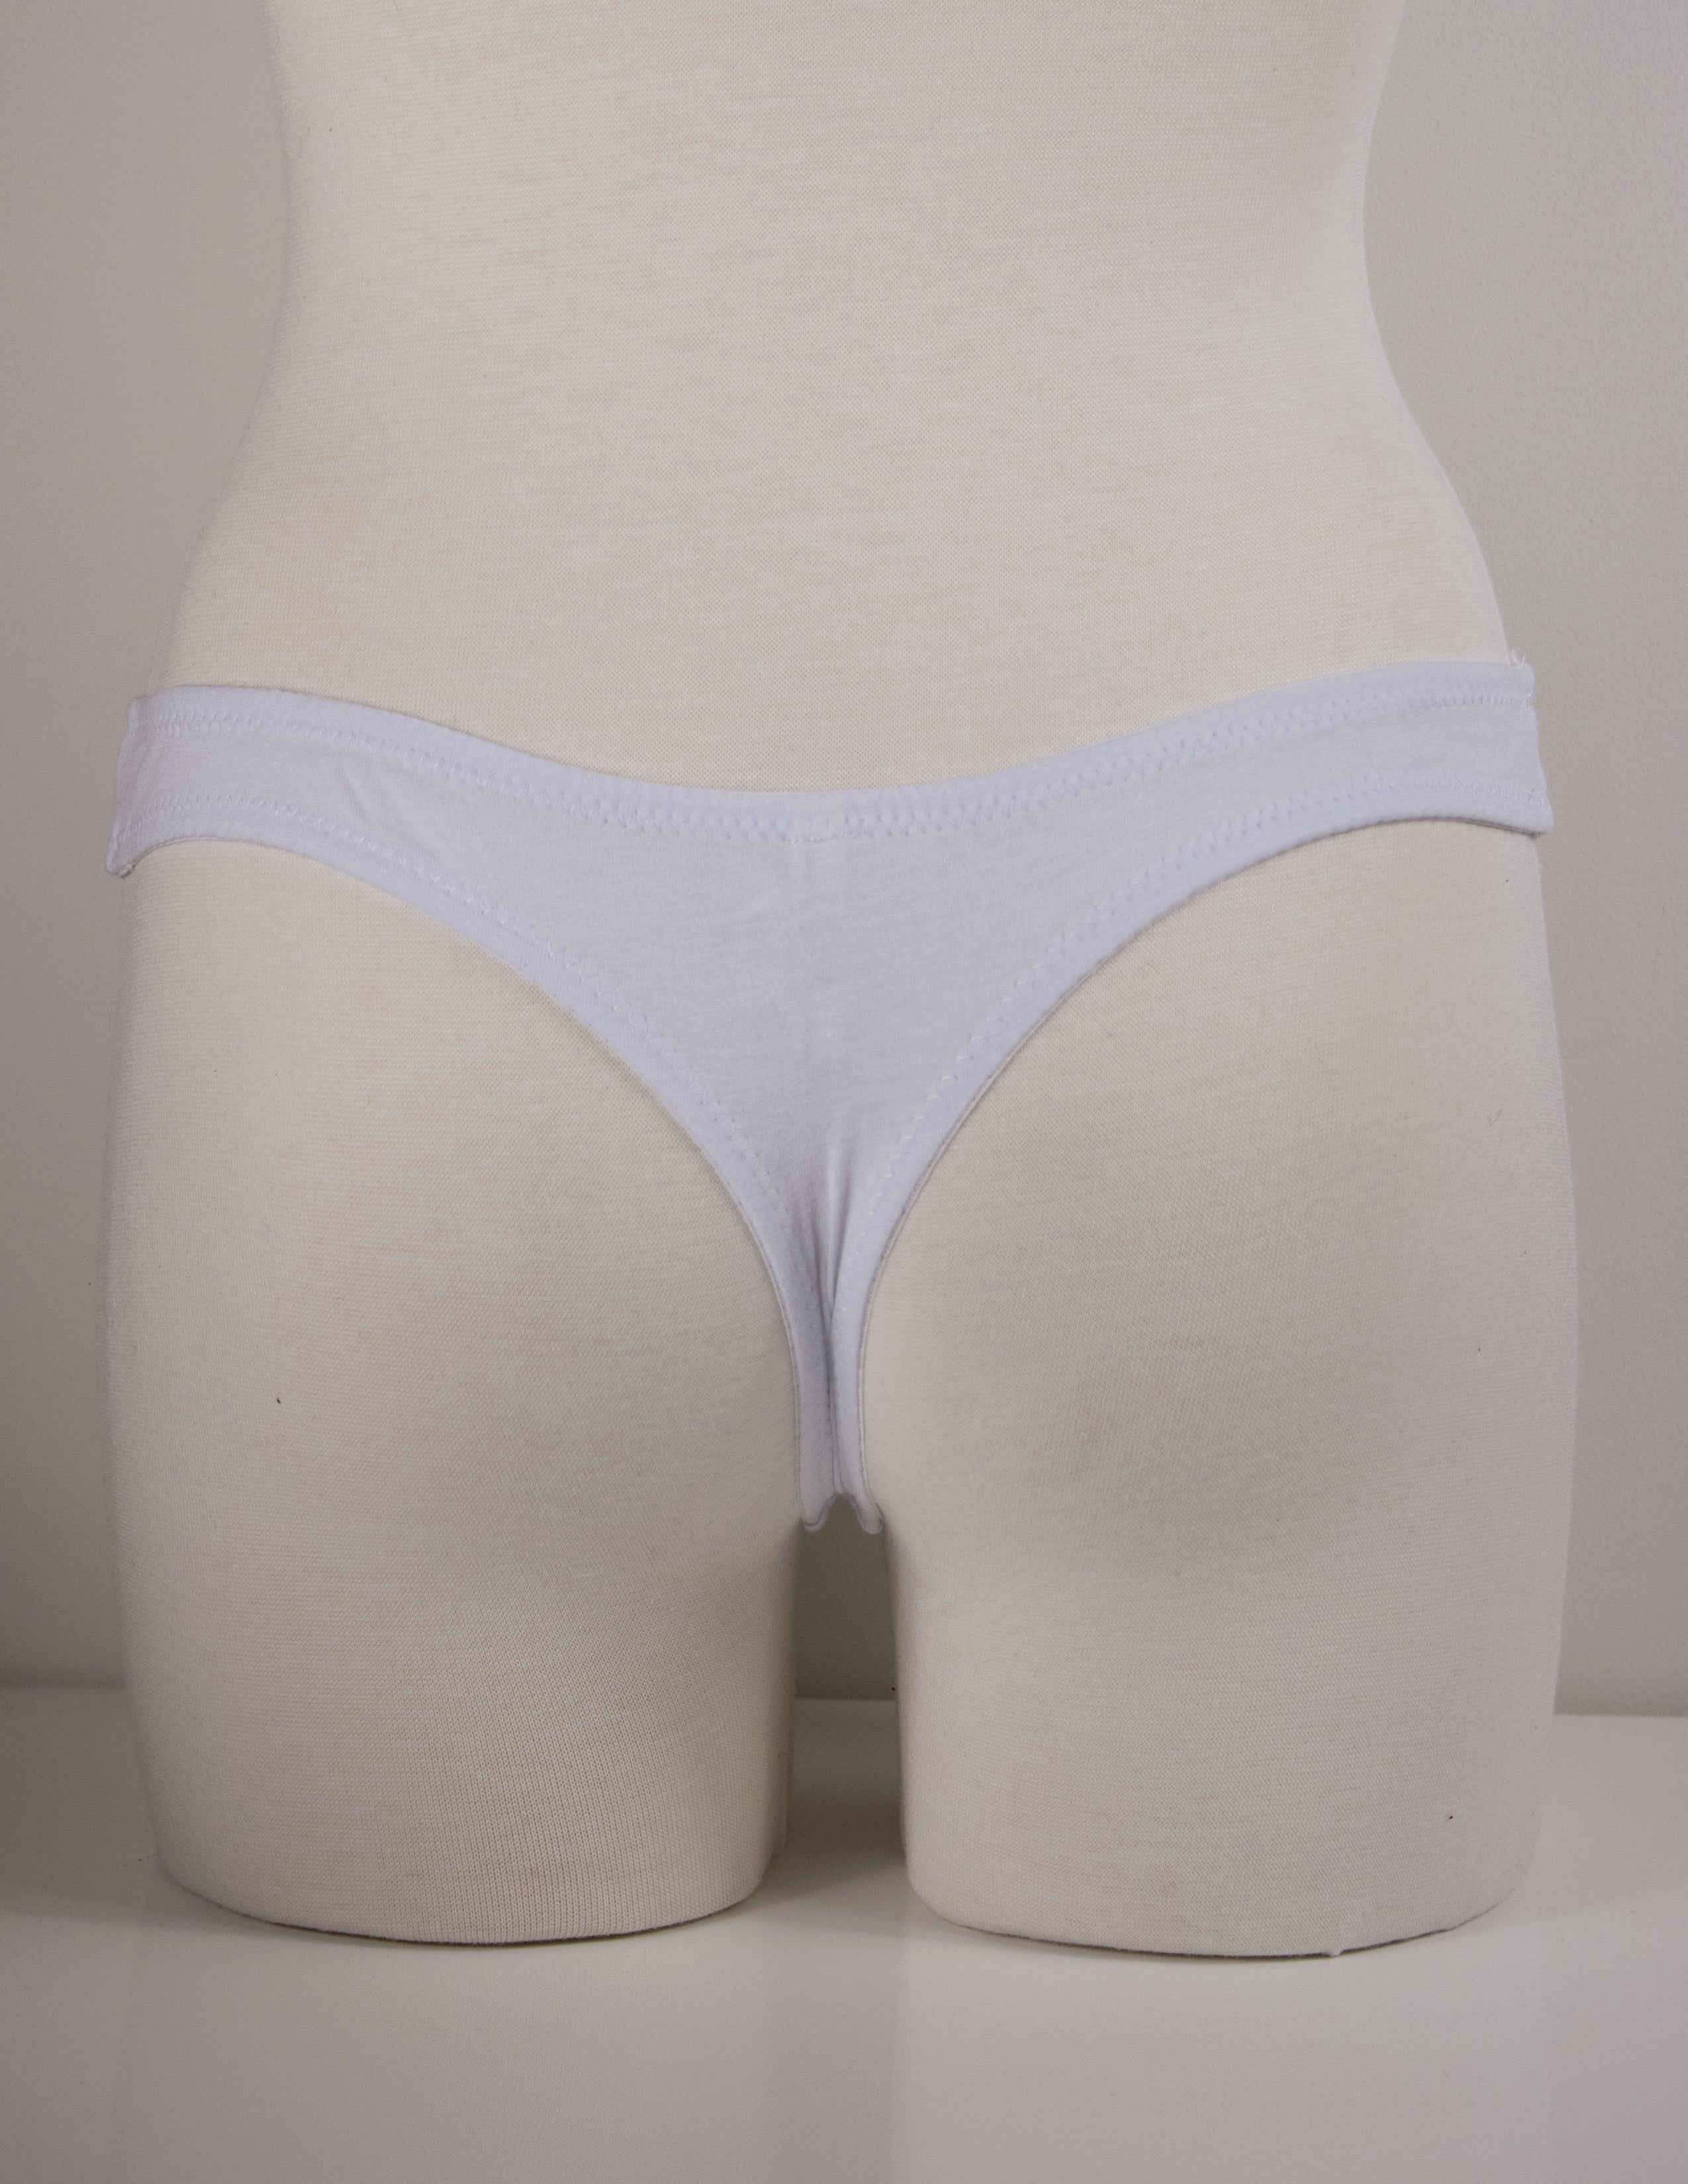 CONSTANCE SLICK THONG- SOY